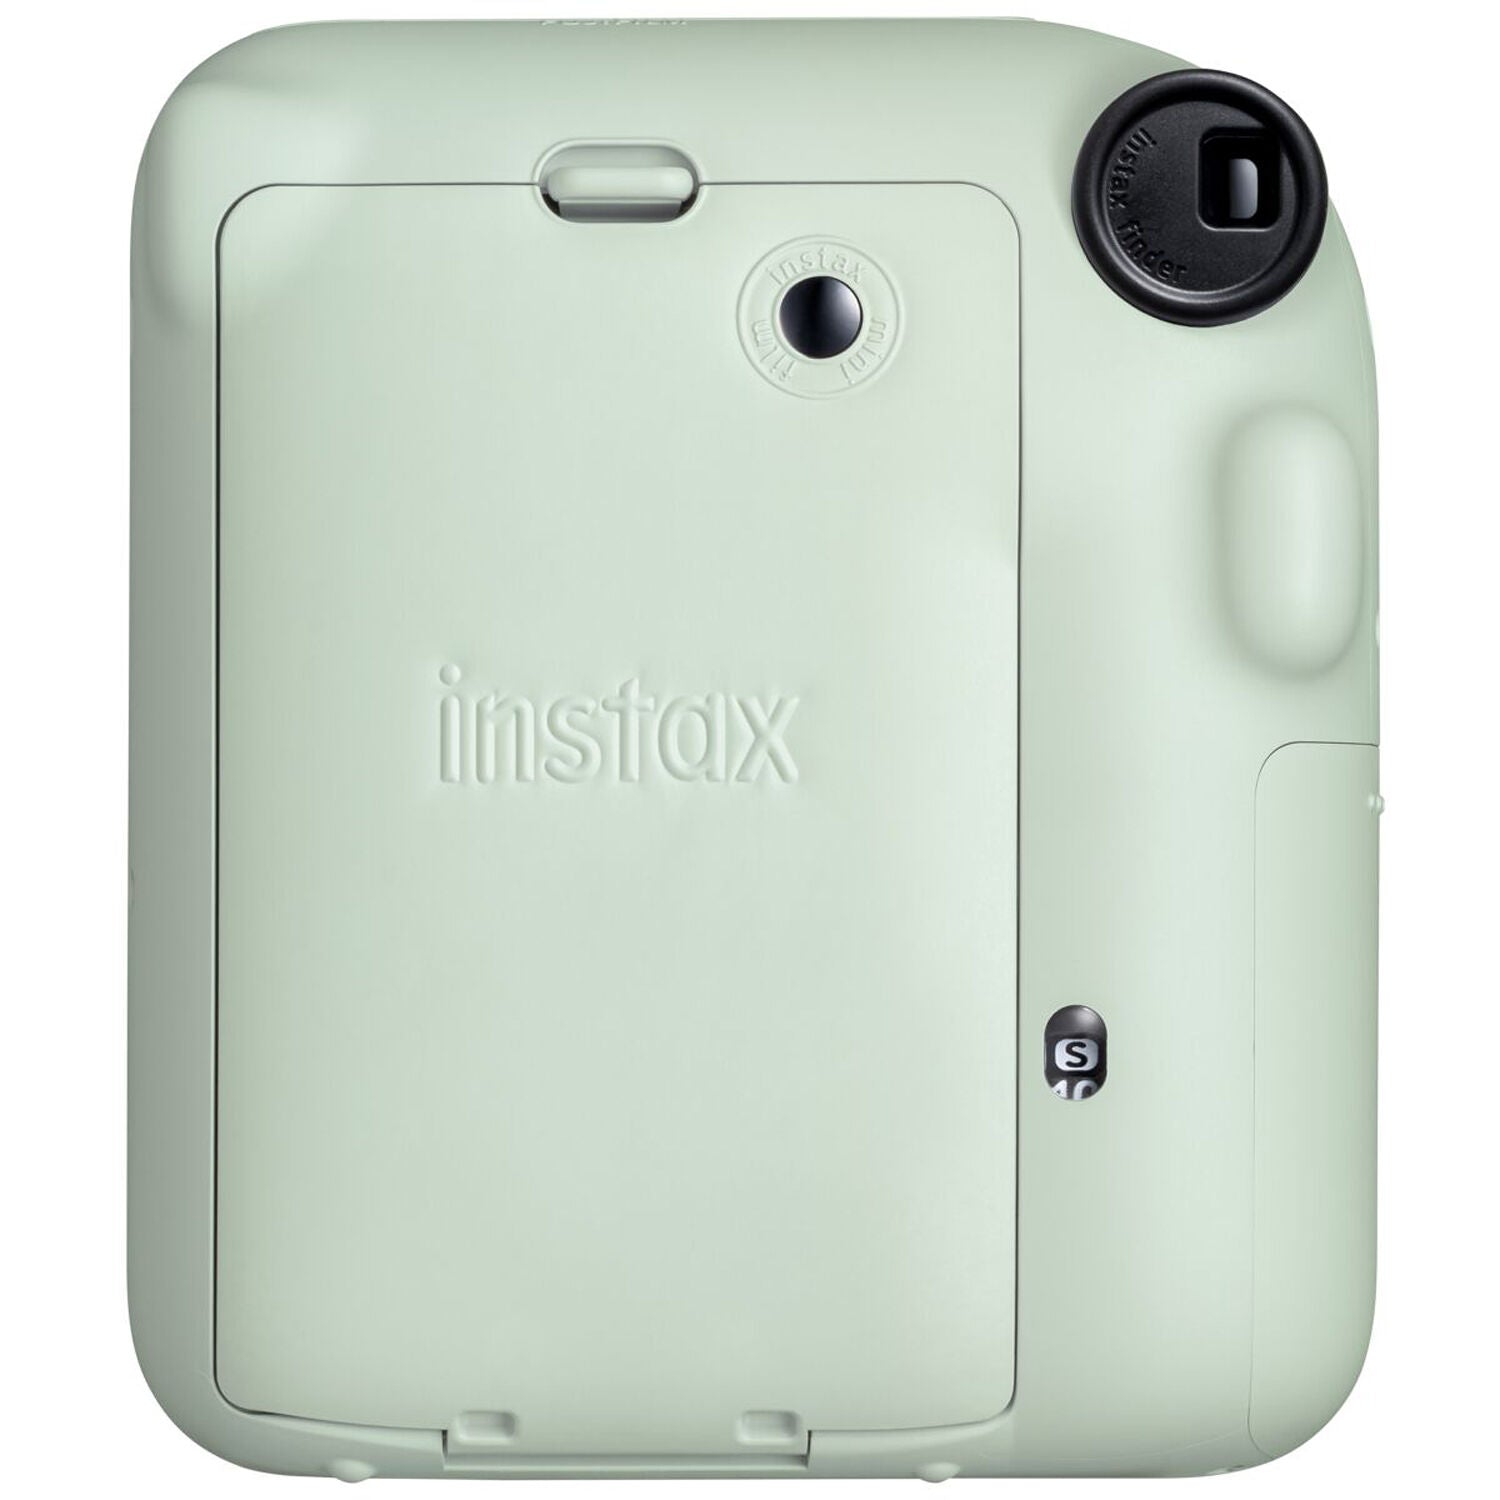 FUJIFILM INSTAX Mini 12 Instant Film Camera with 10X1 Pack of Instant Film With Blue Pouch Kit (Mint Green, 10 Exposures)